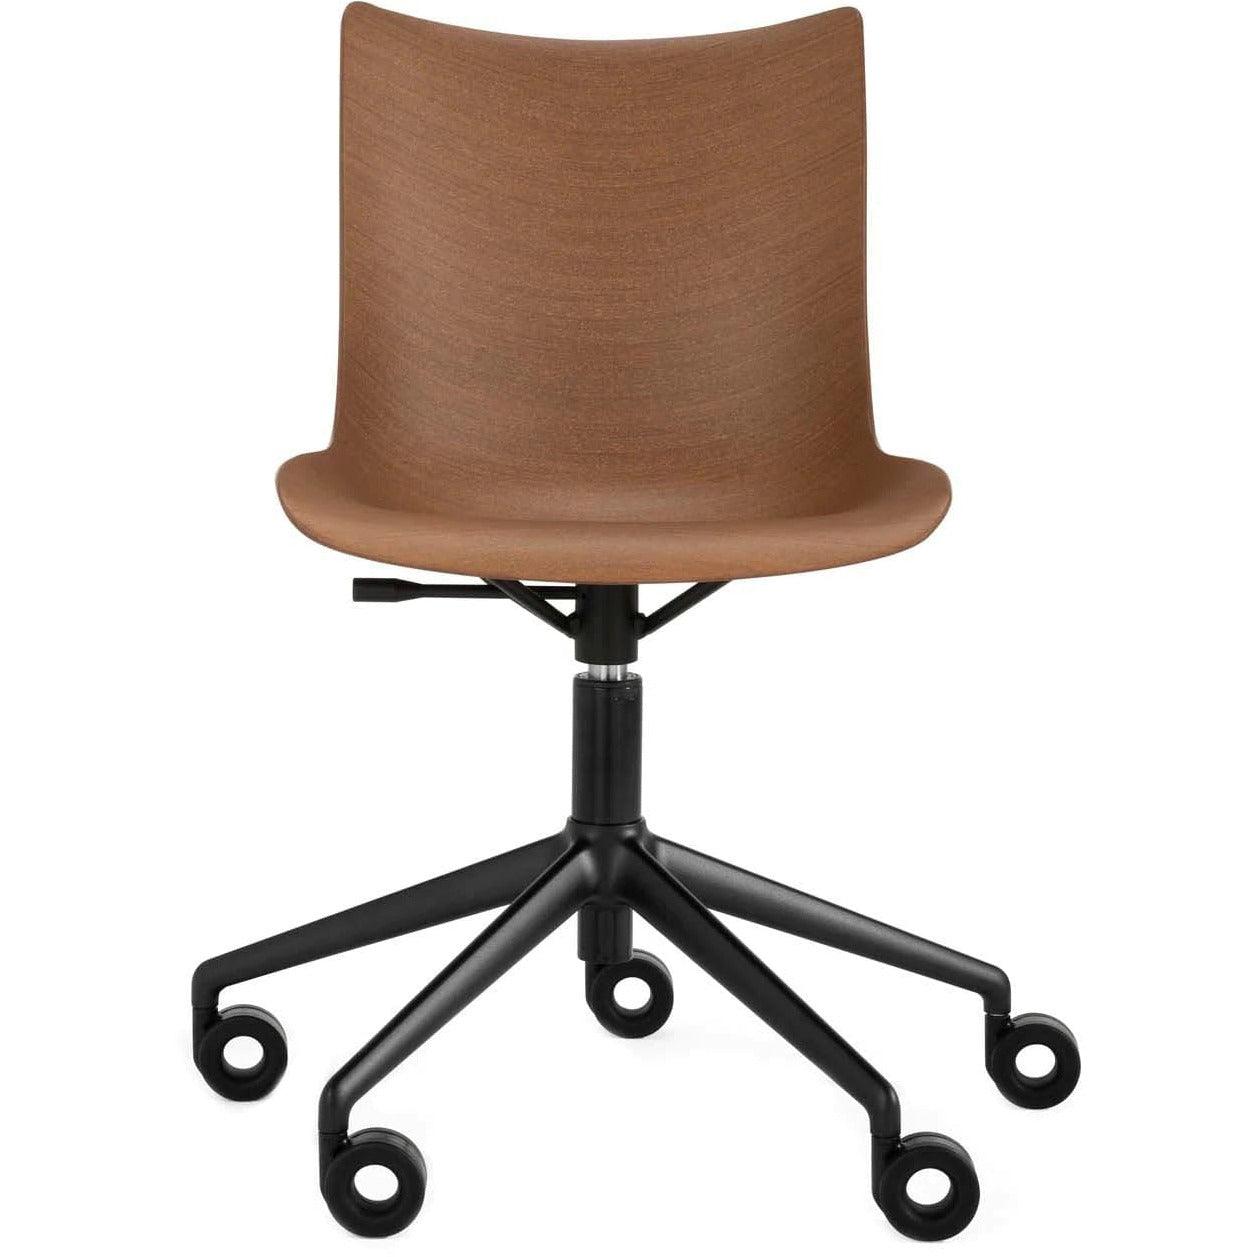 P/Wood Adjustable Height Desk Chair with Wheels - Curated - Furniture - Kartell